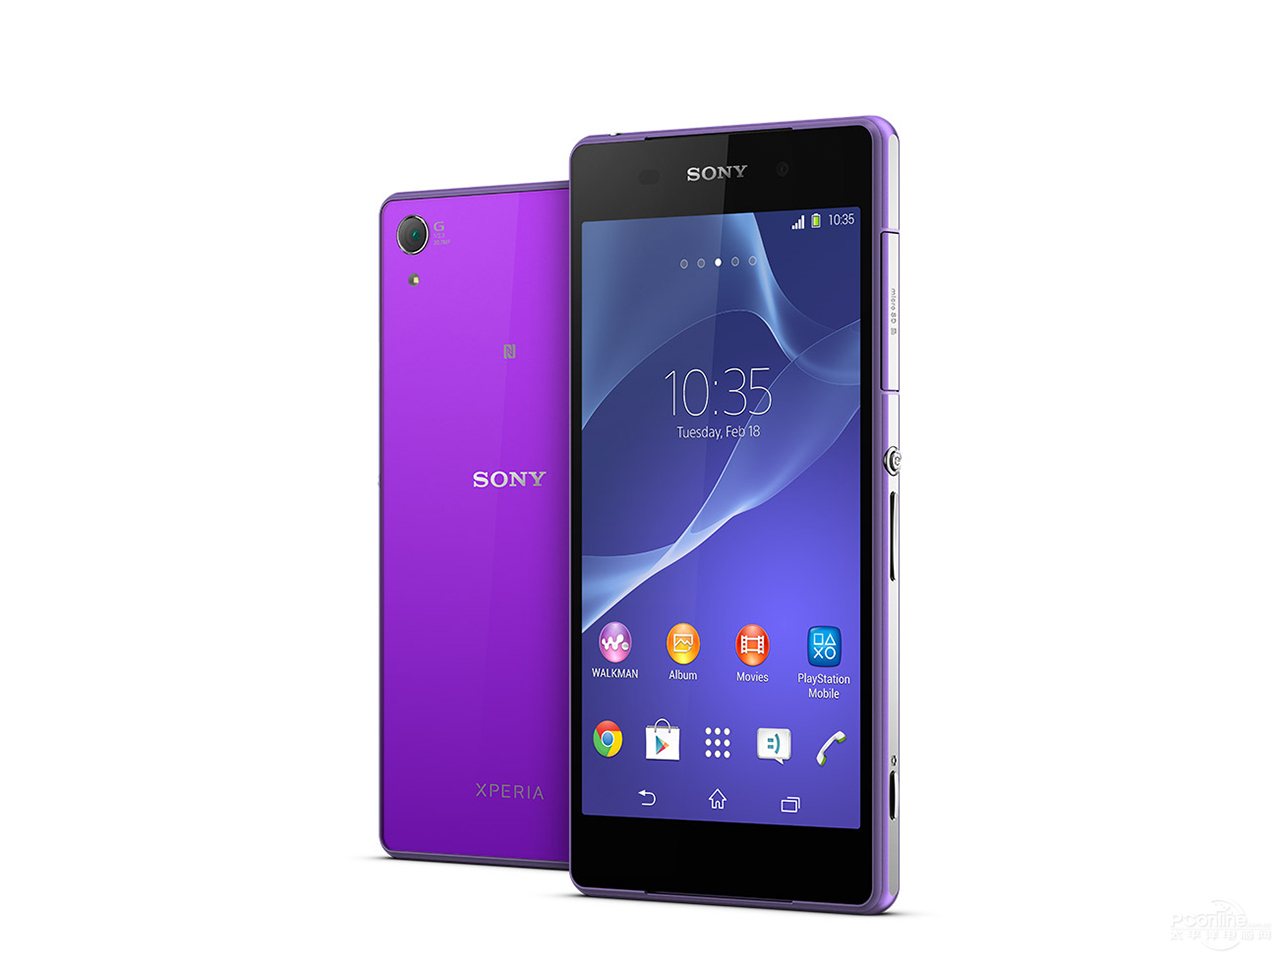 [MWC 2014] Sony Officially Announces The Xperia Z2 Flagship Phone And ...